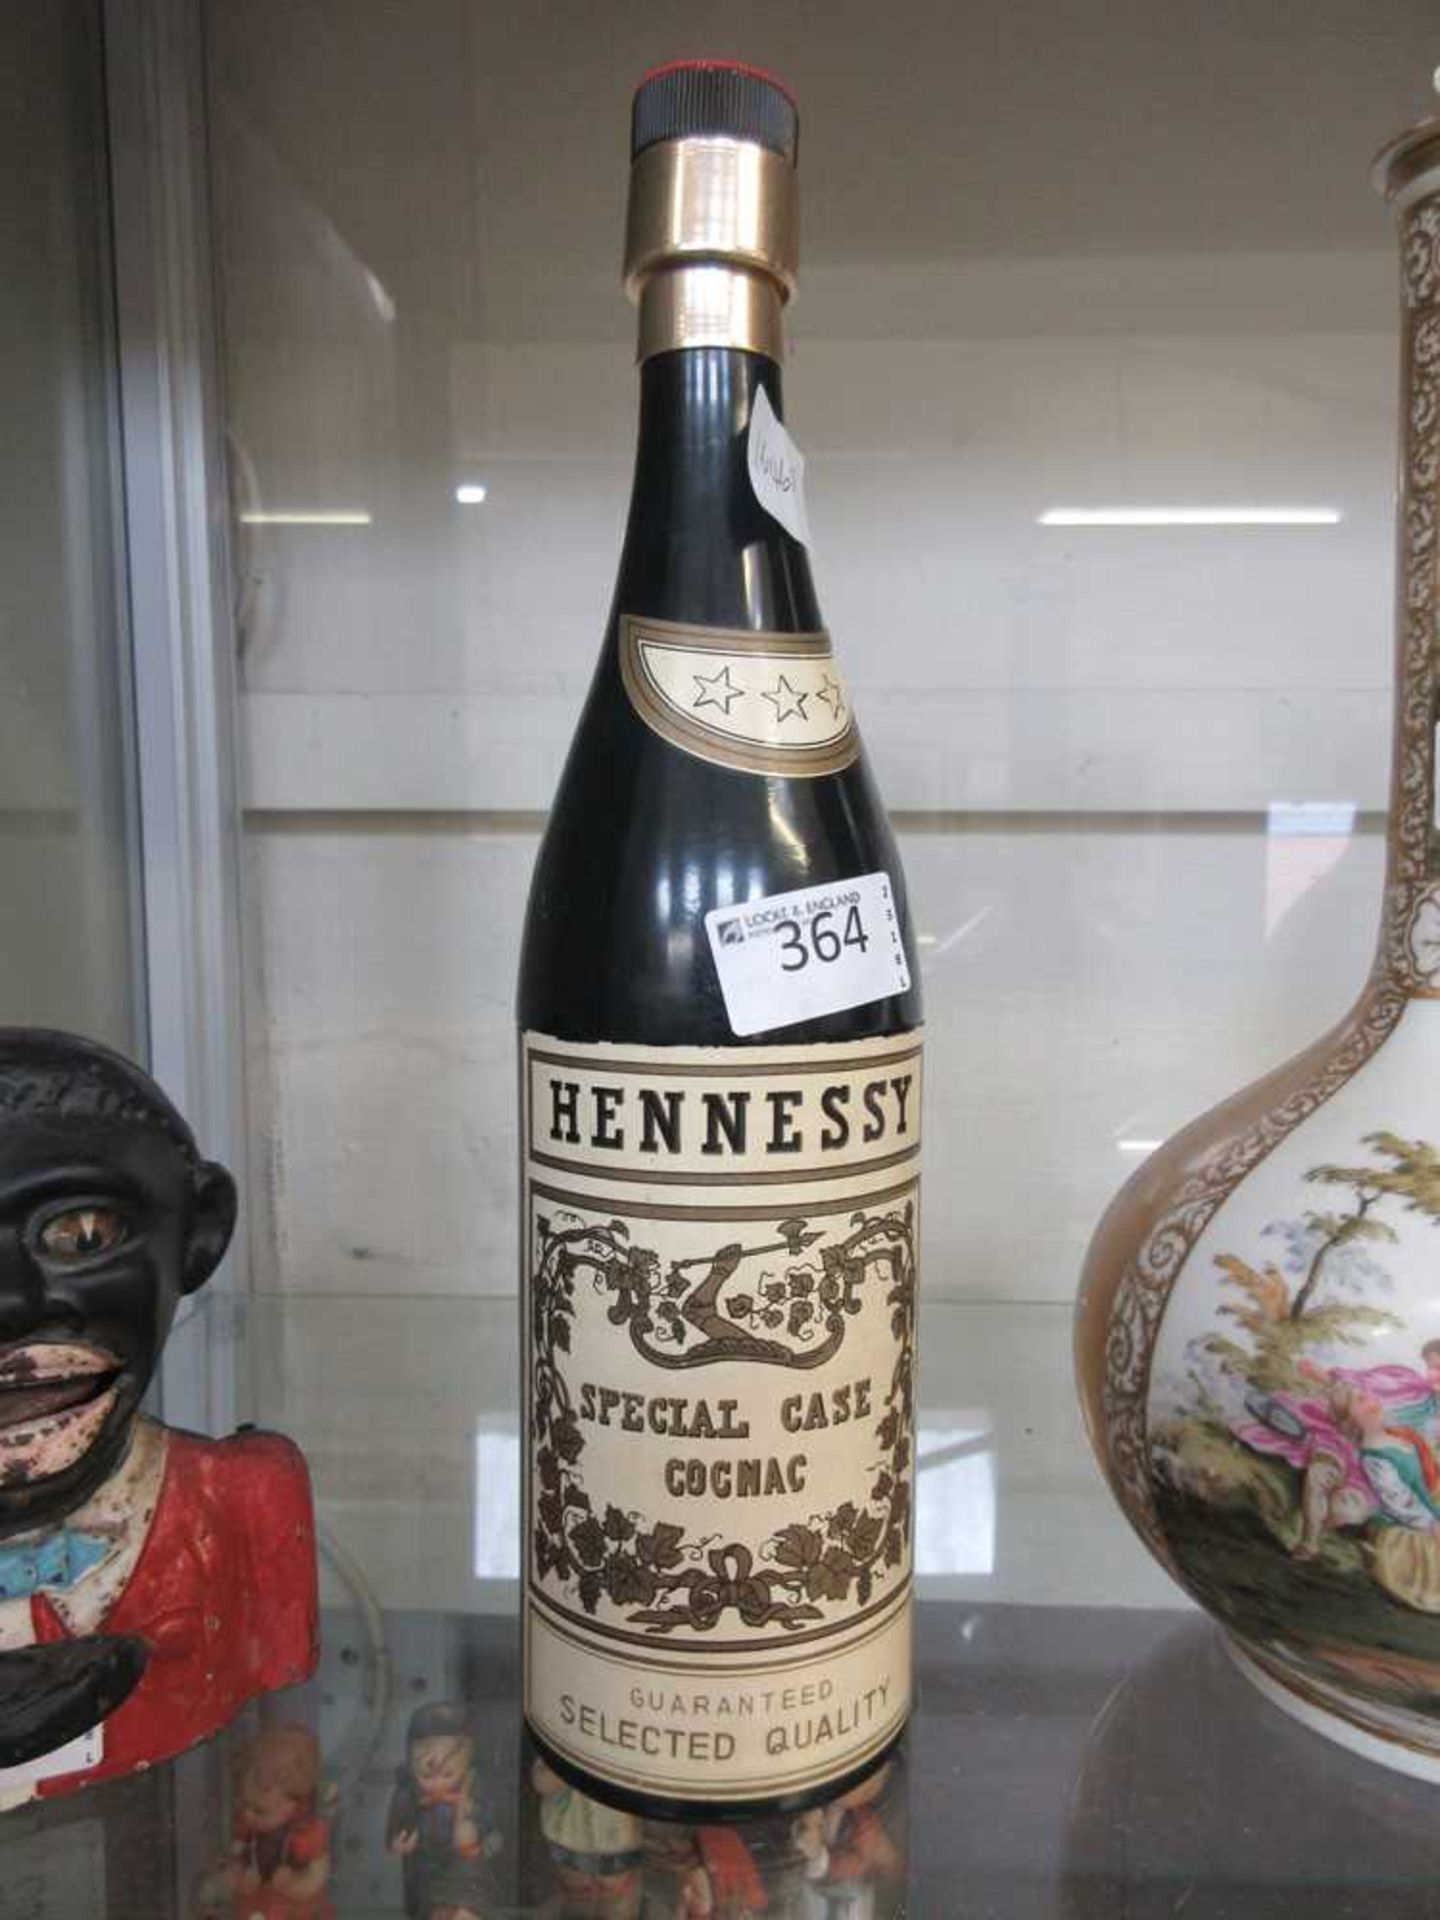 A mid-20th century cigarette dispenser in the form of a cognac bottle